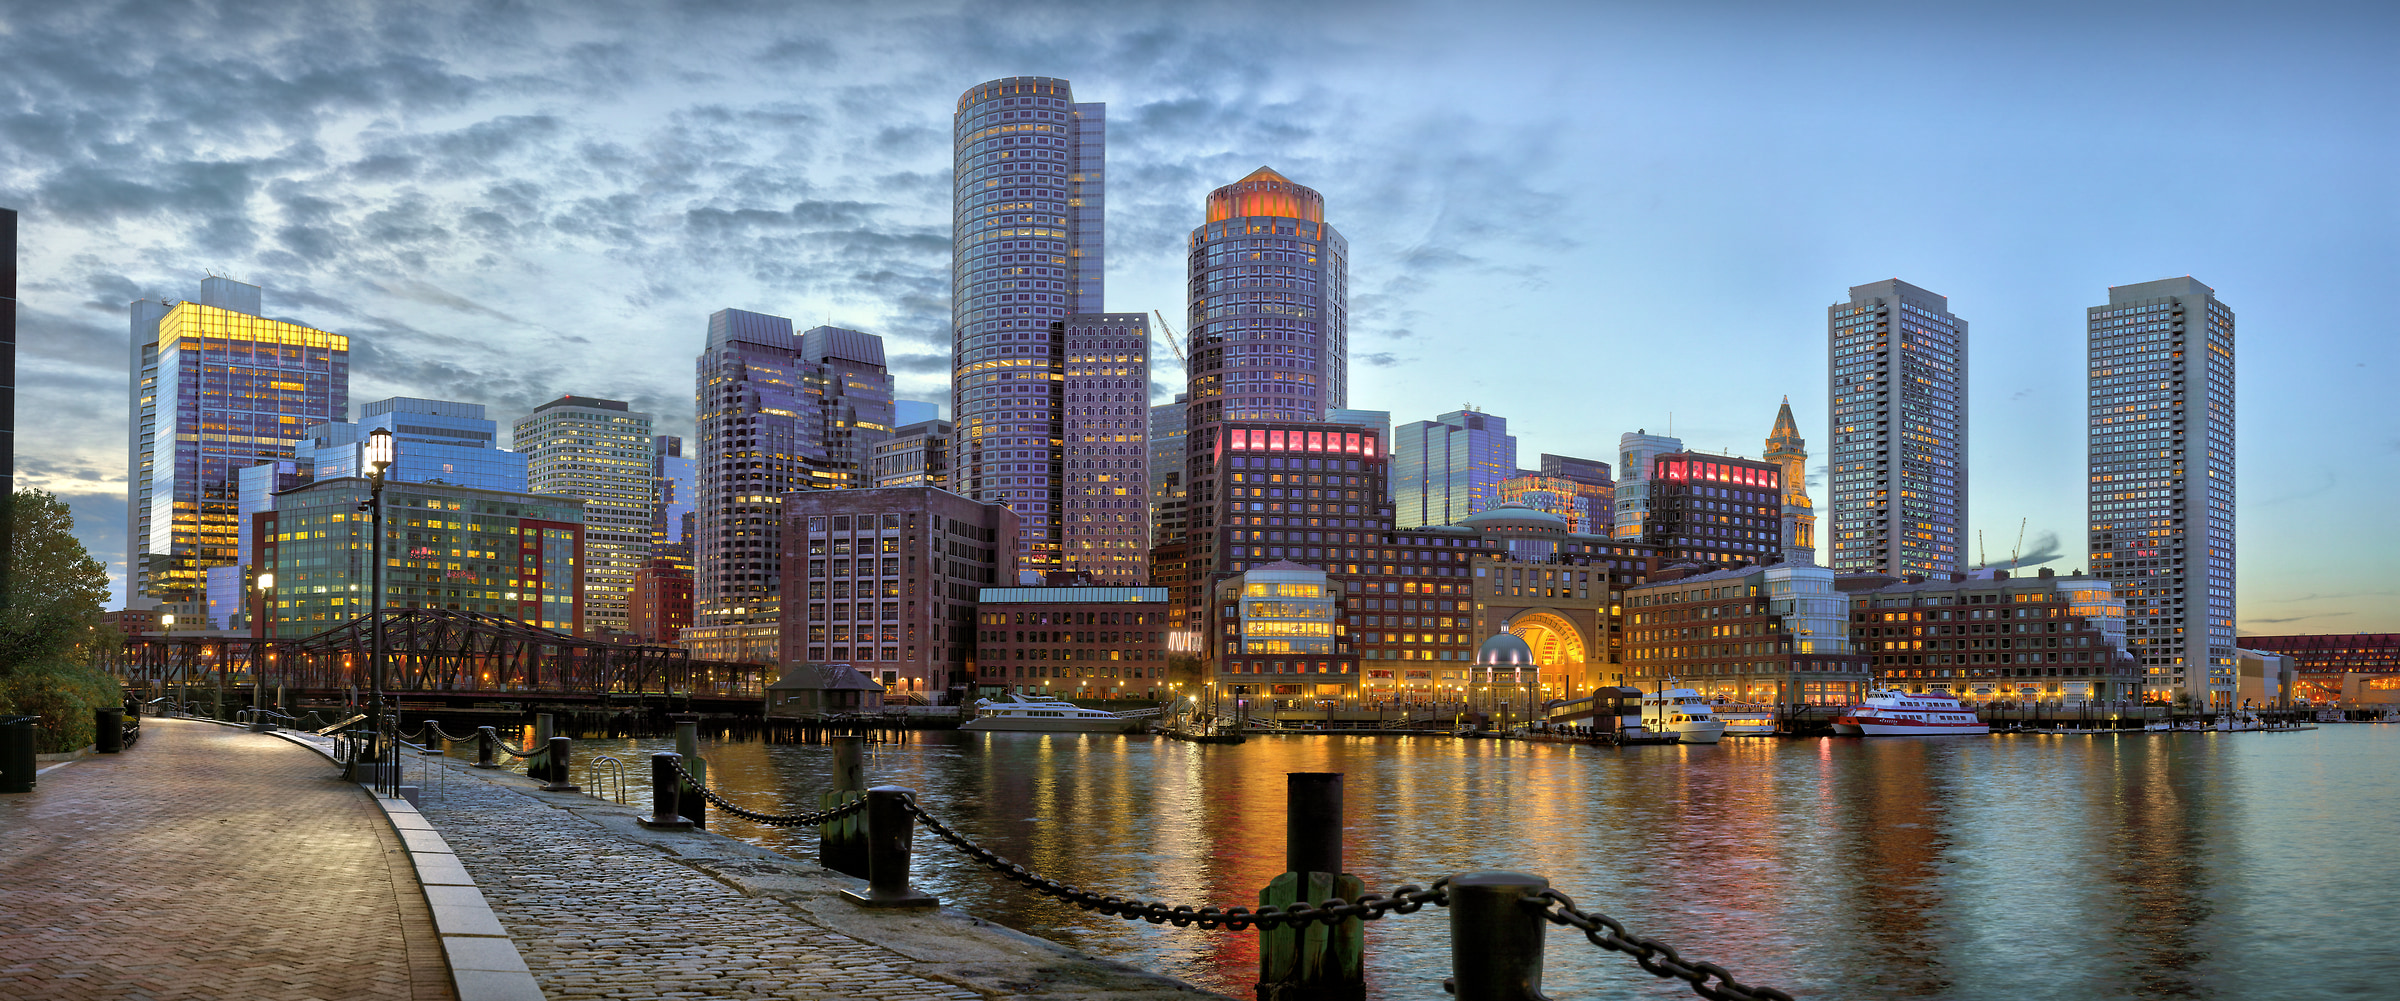 623 megapixels! A very high resolution, large-format VAST photo print of the Boston skyline; photograph created by Phil Crawshay in Fan Pier Park, Boston, Massachusetts.